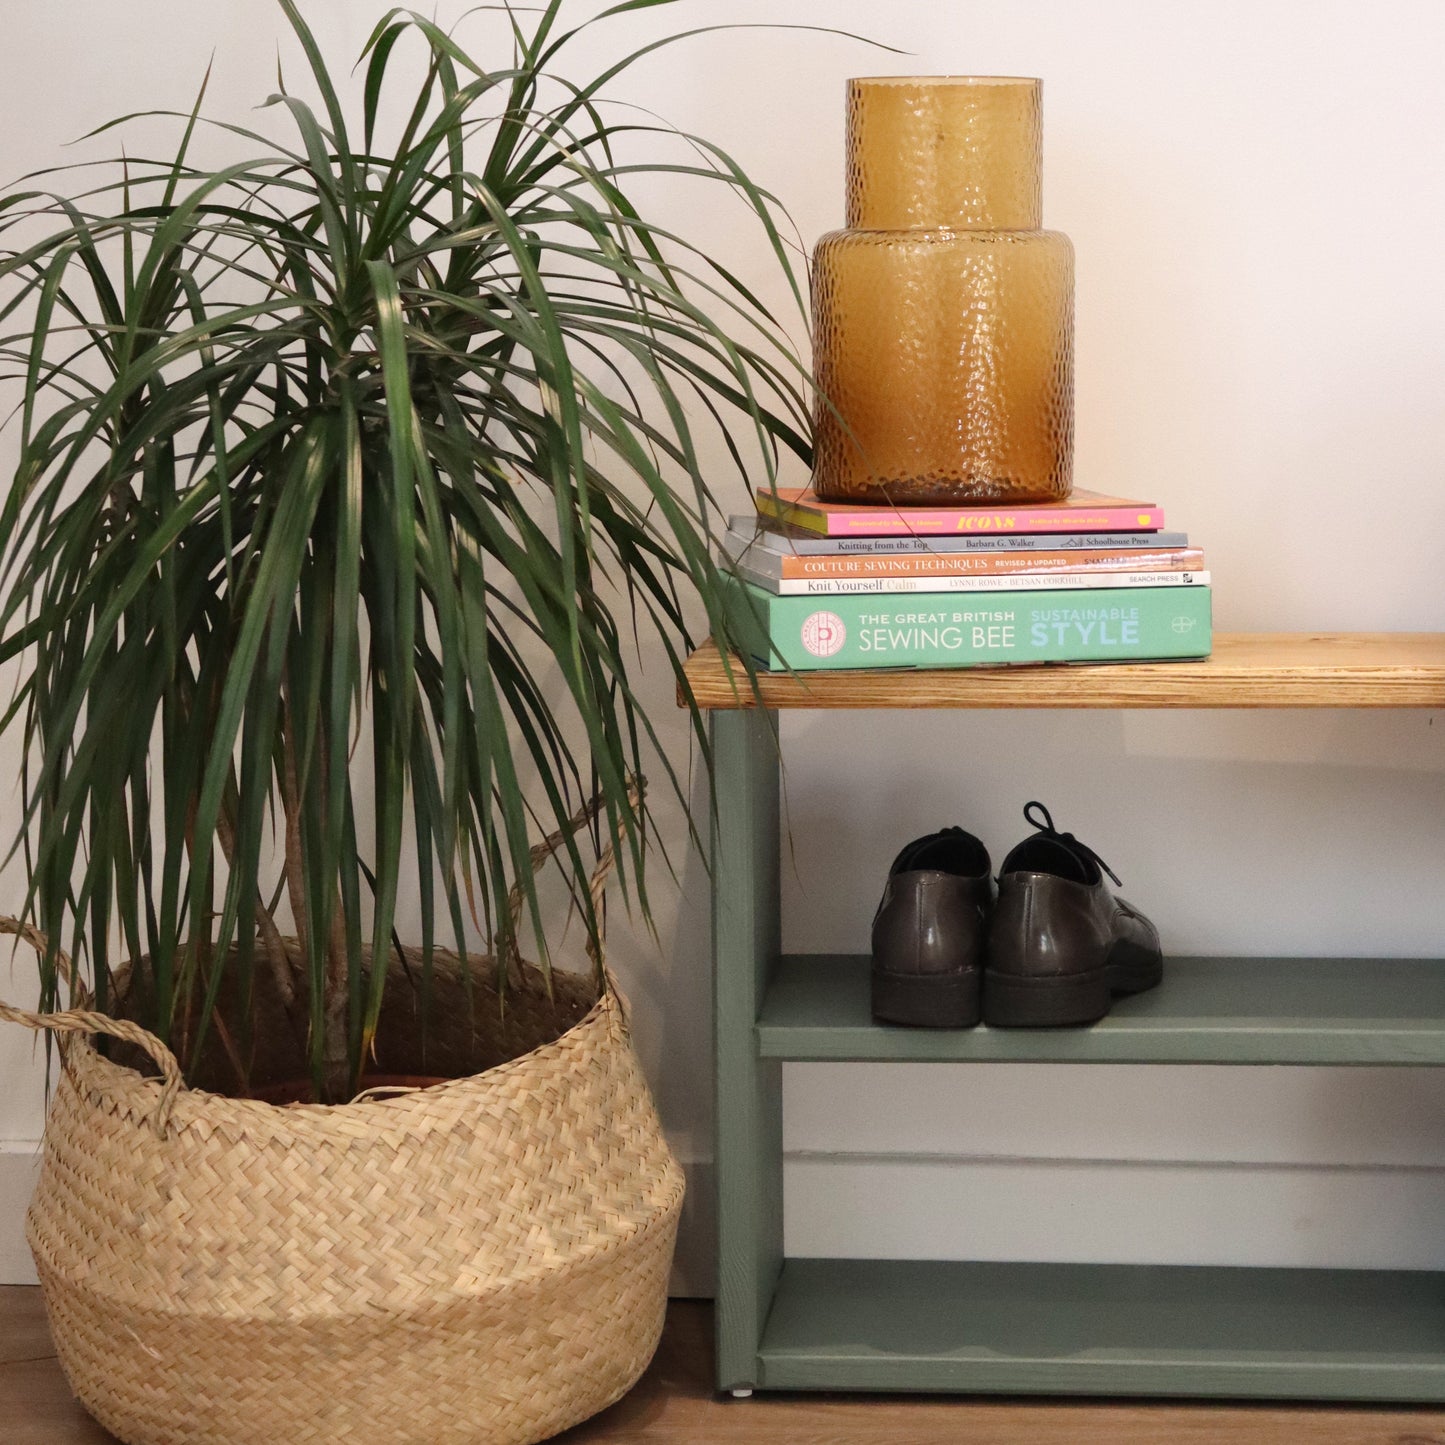 Wooden Shoe Storage Bench Narrow - 120 cm by 22 cm by 50 cm